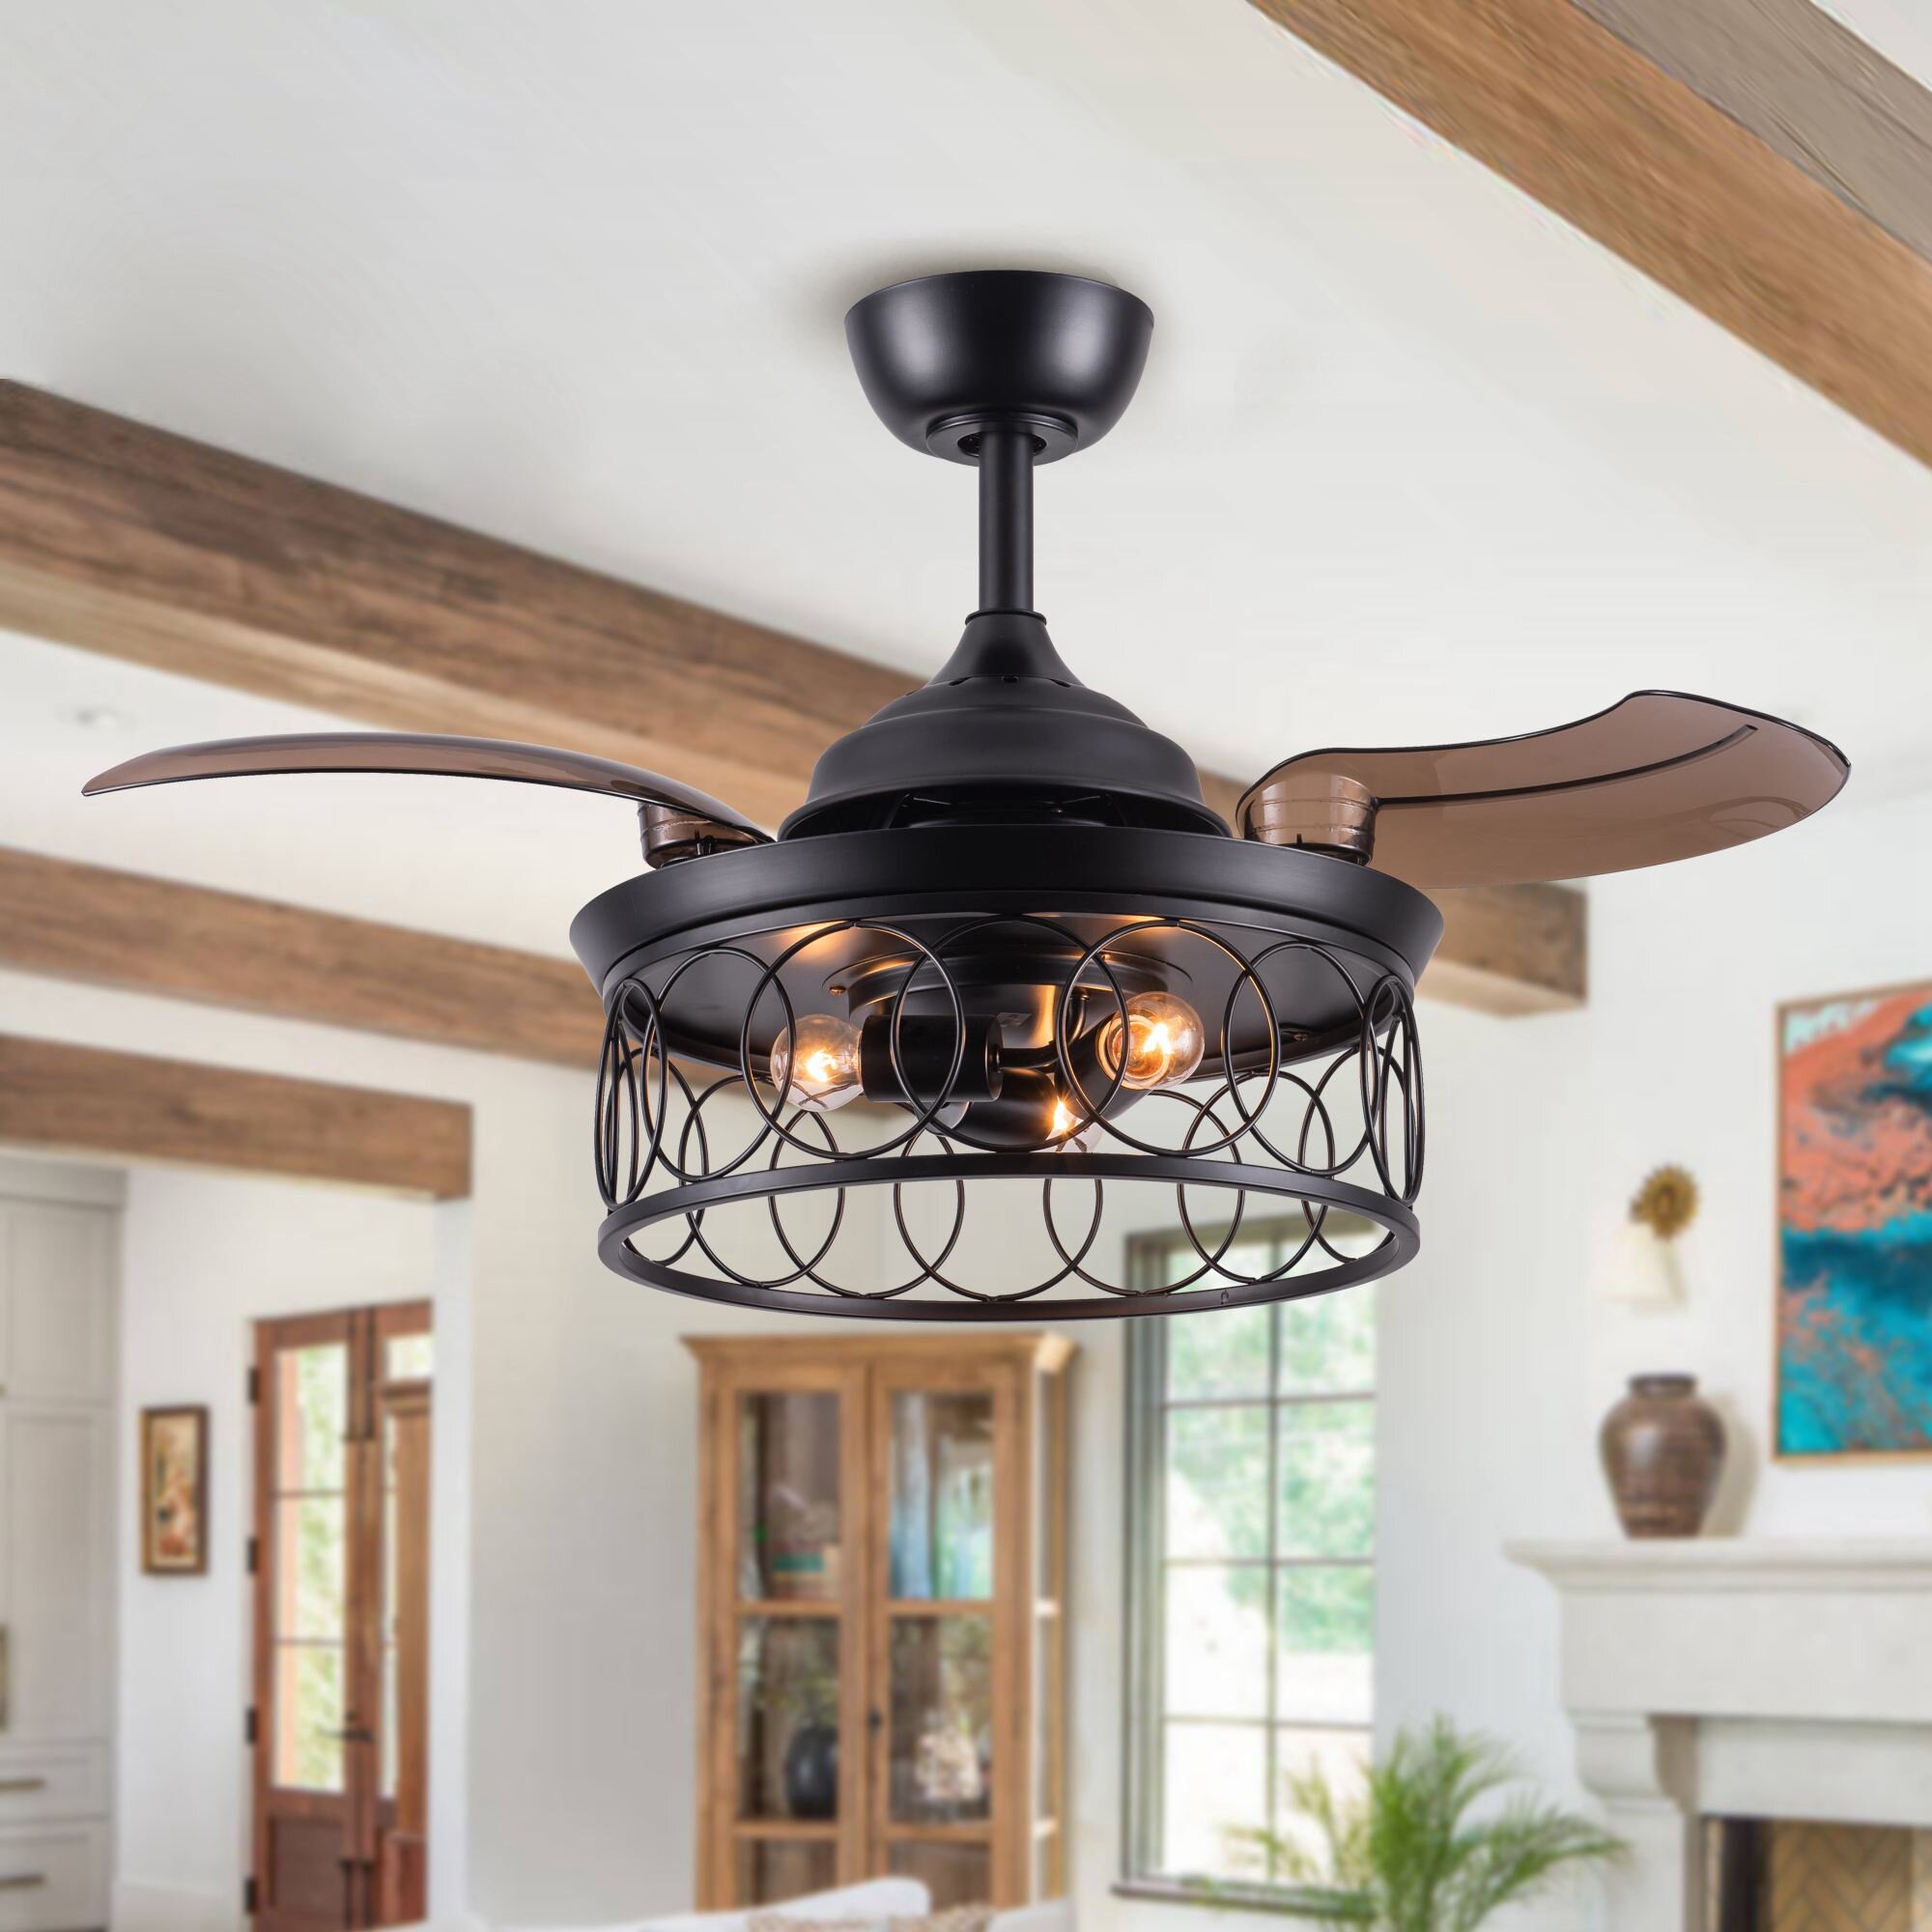 Small Room Ceiling Fan 36" Remote Control LED Light Airflow Speed Matte Black 